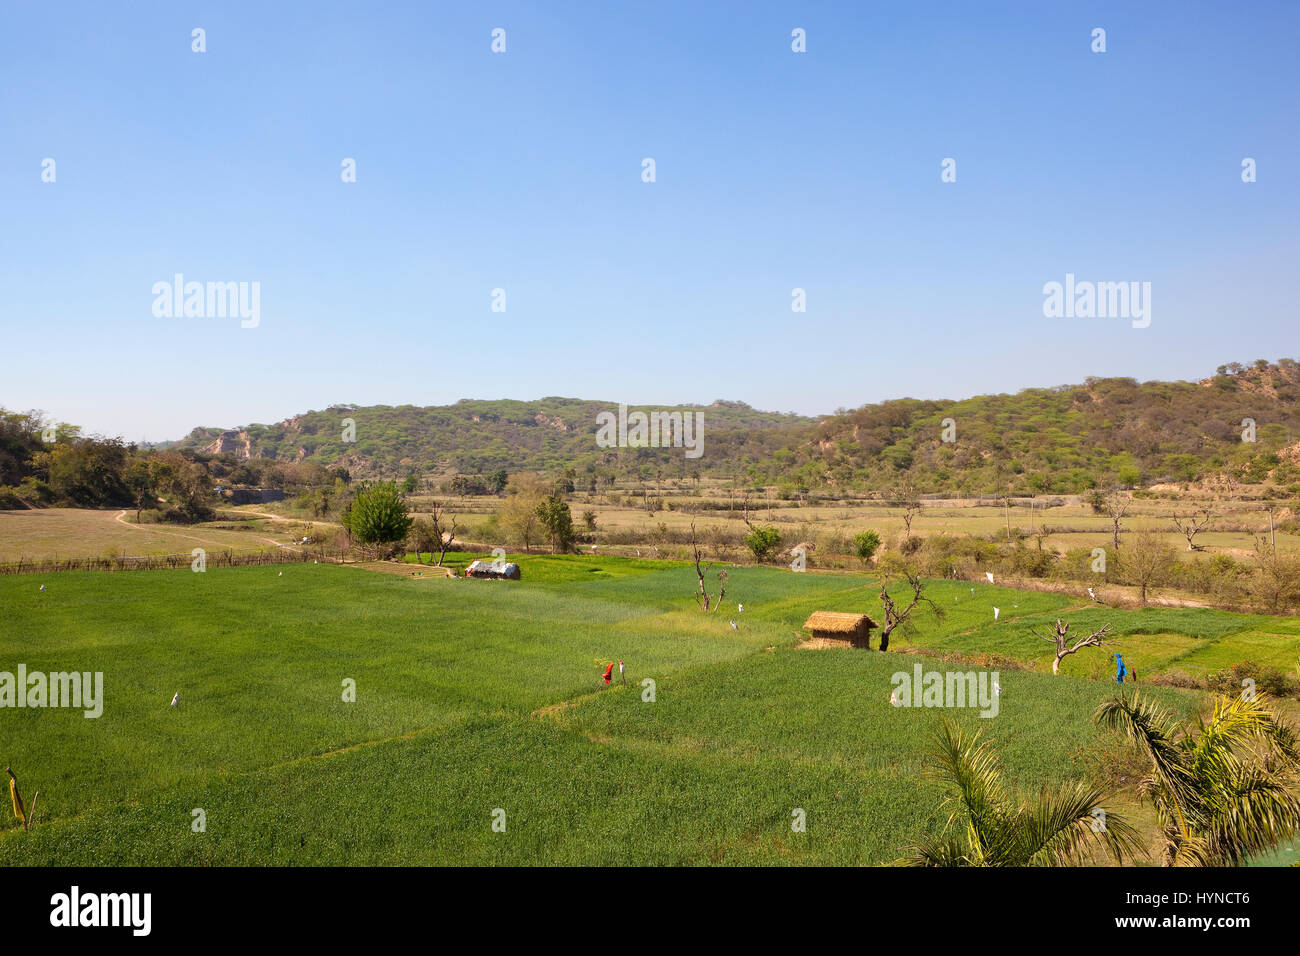 wheat fields and straw huts in scenic morni hills chandigarh india with acacia woodland under a clear blue sky Stock Photo